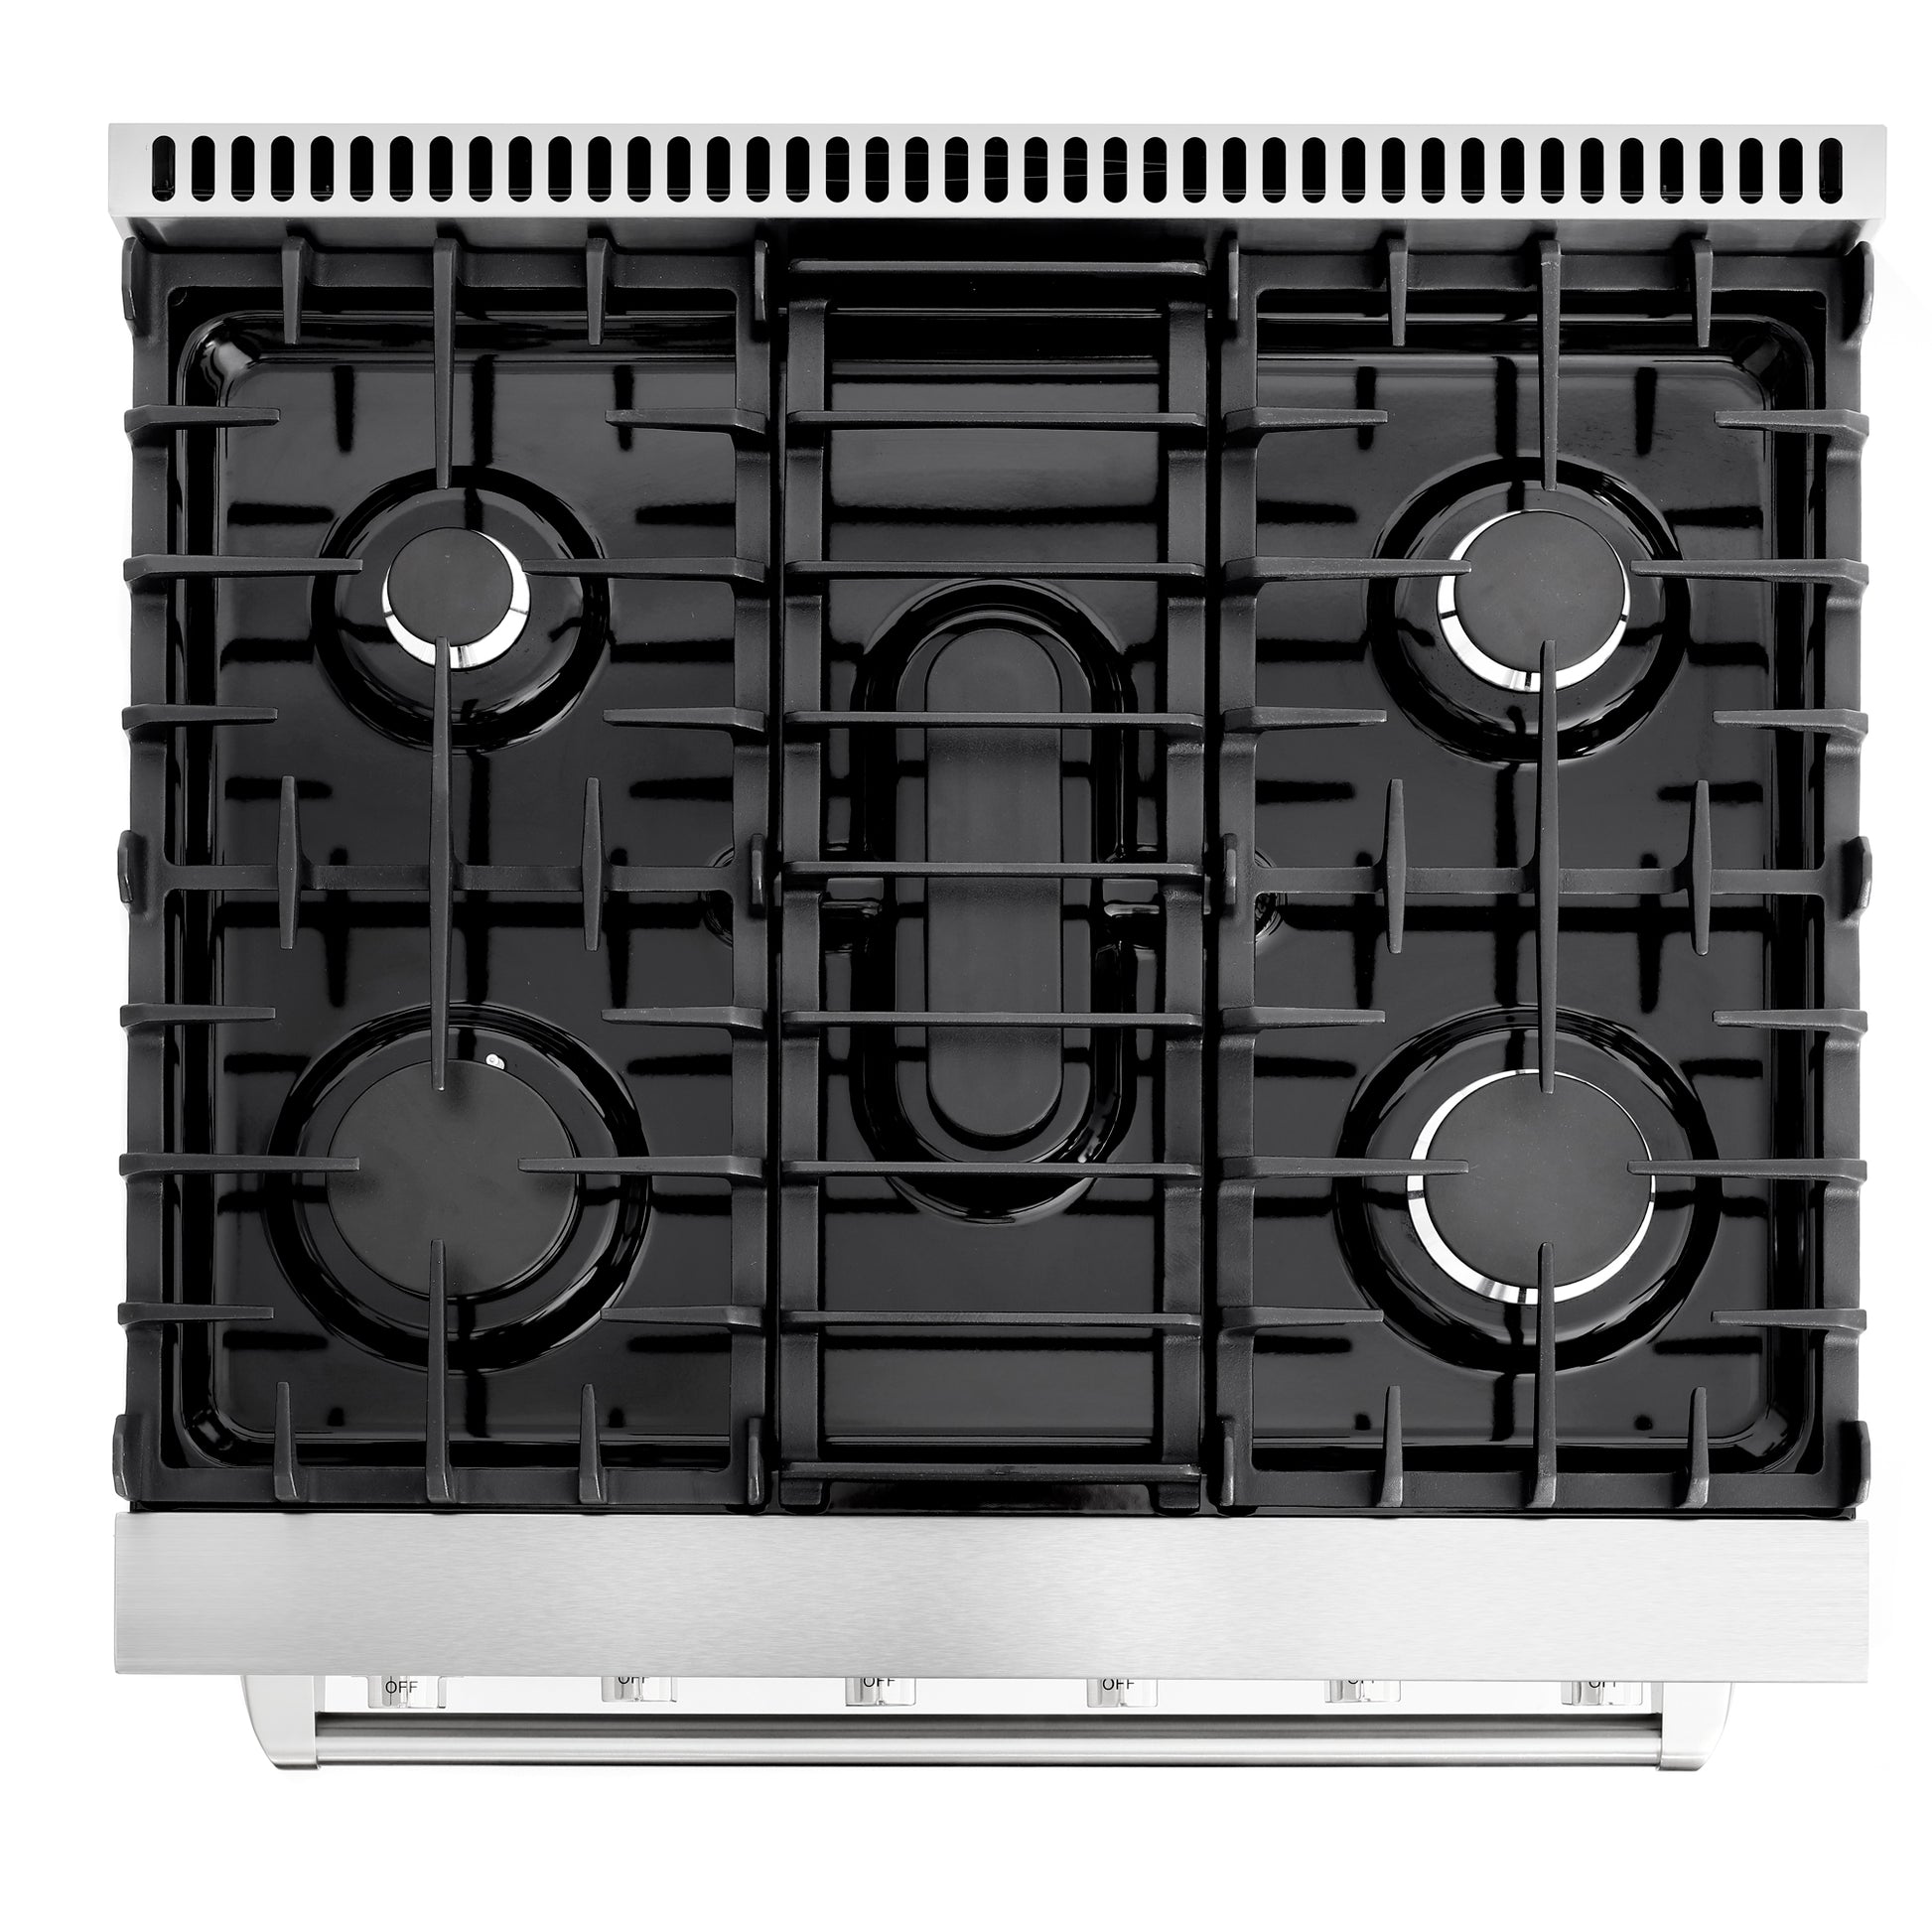 Cosmo 30 in. Slide-In Freestanding Gas Range in Stainless Steel with 5 Sealed Burners, Cast Iron Grates, 4.5 cu. ft. Capacity Convection Oven